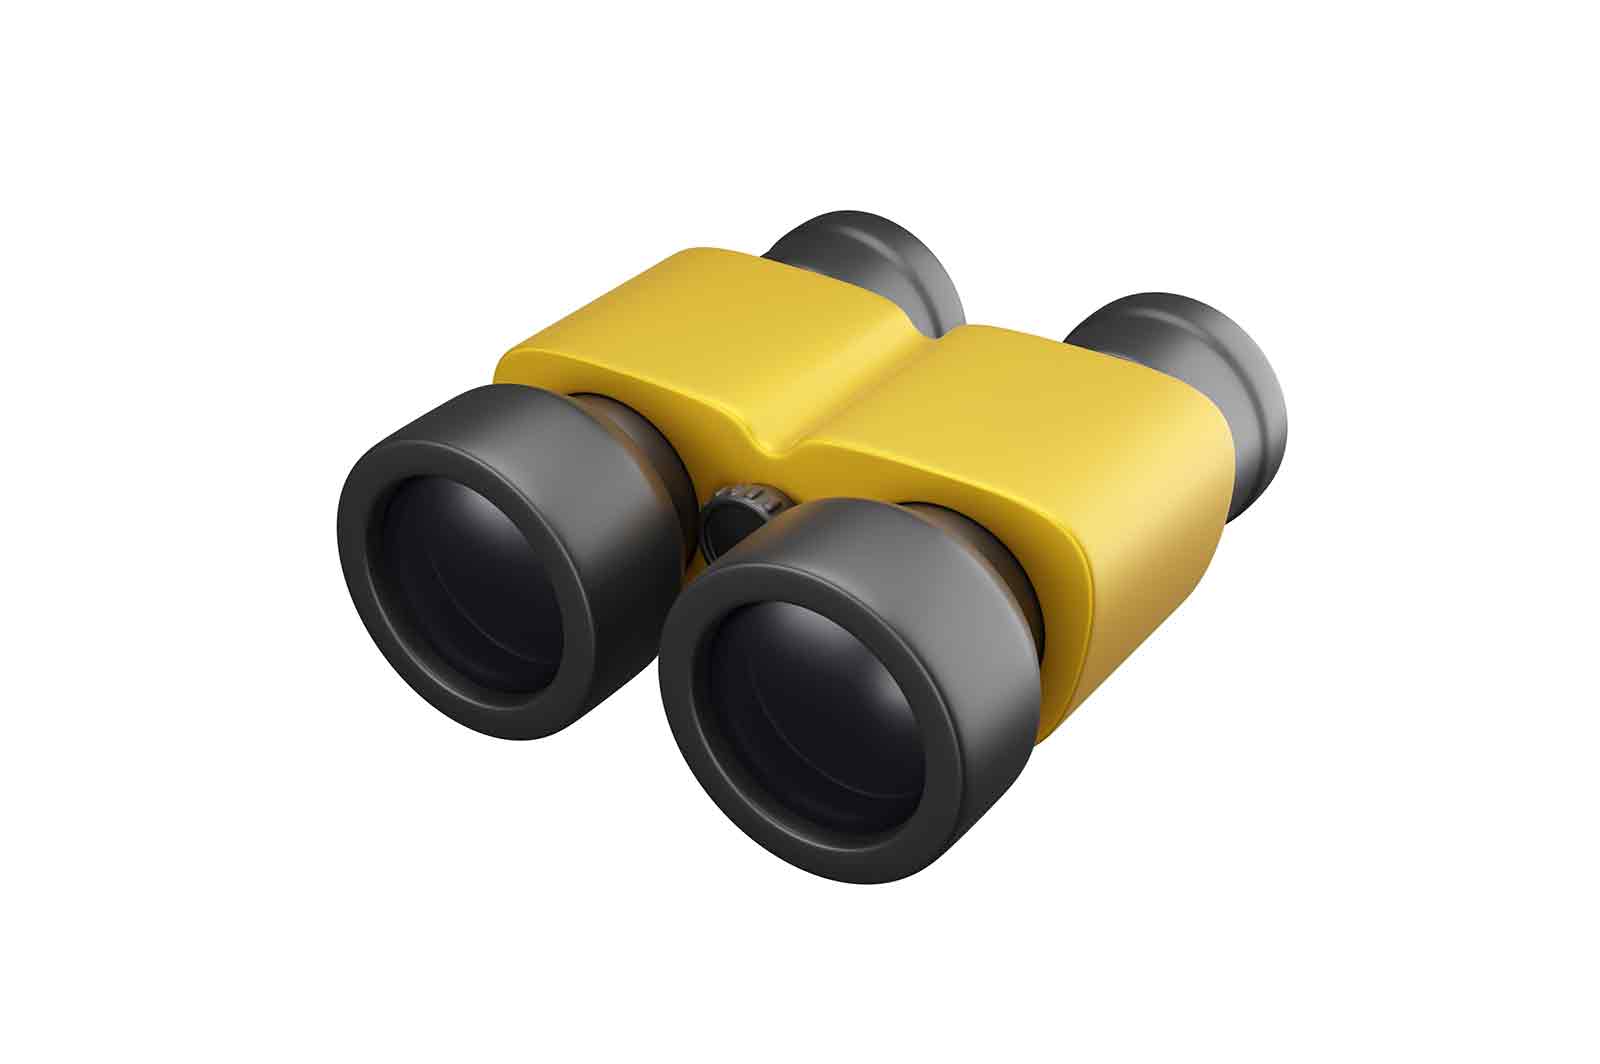 Binoculars icon, optical instrument, lenses and zoom, hunting sport equipment 3d rendered illustration.